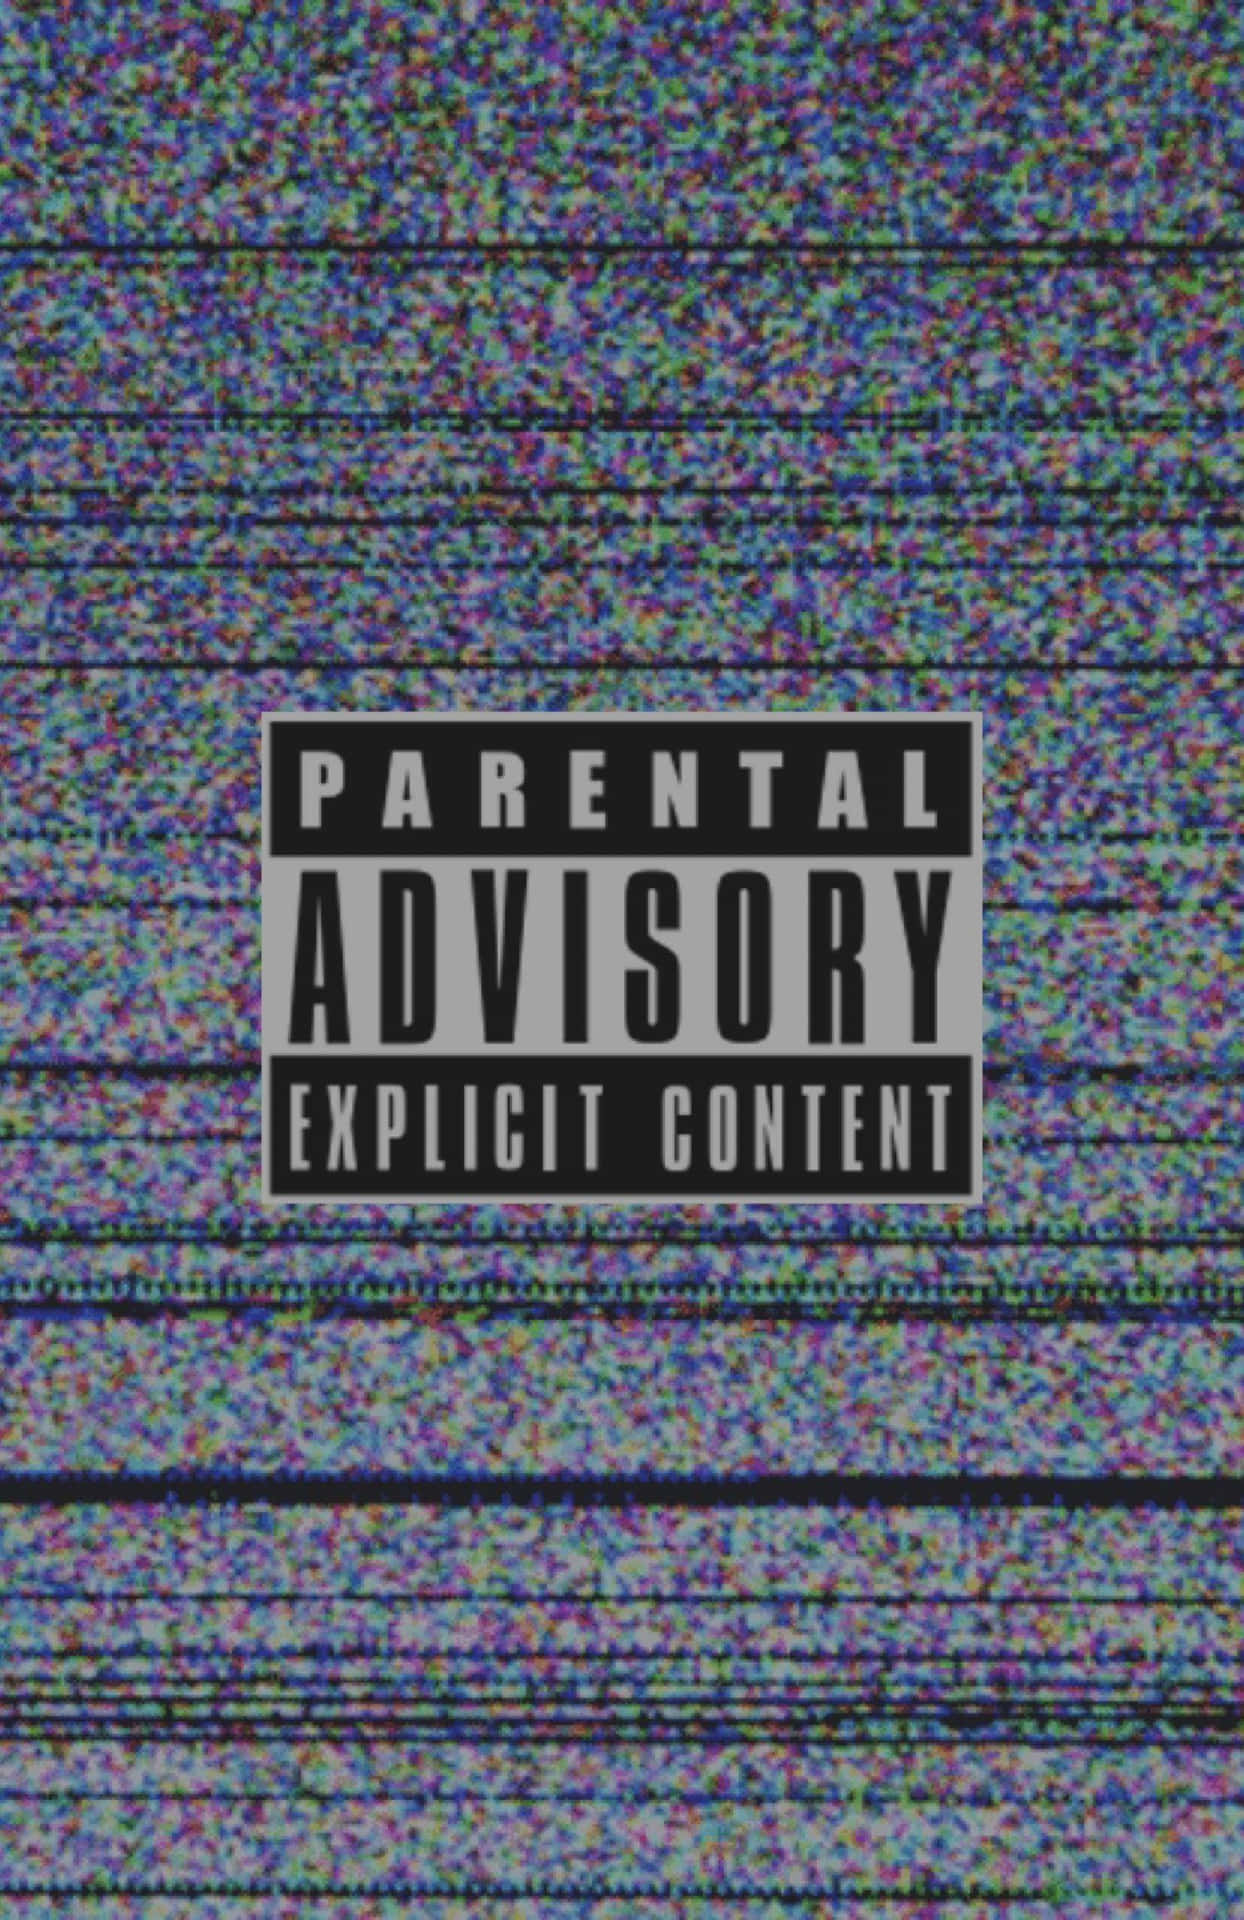 Download Parental Advisory wallpaper by theslambaugh now Browse millions  of popular hyp  Hypebeast wallpaper Parental advisory wallpaper Dark  wallpaper iphone